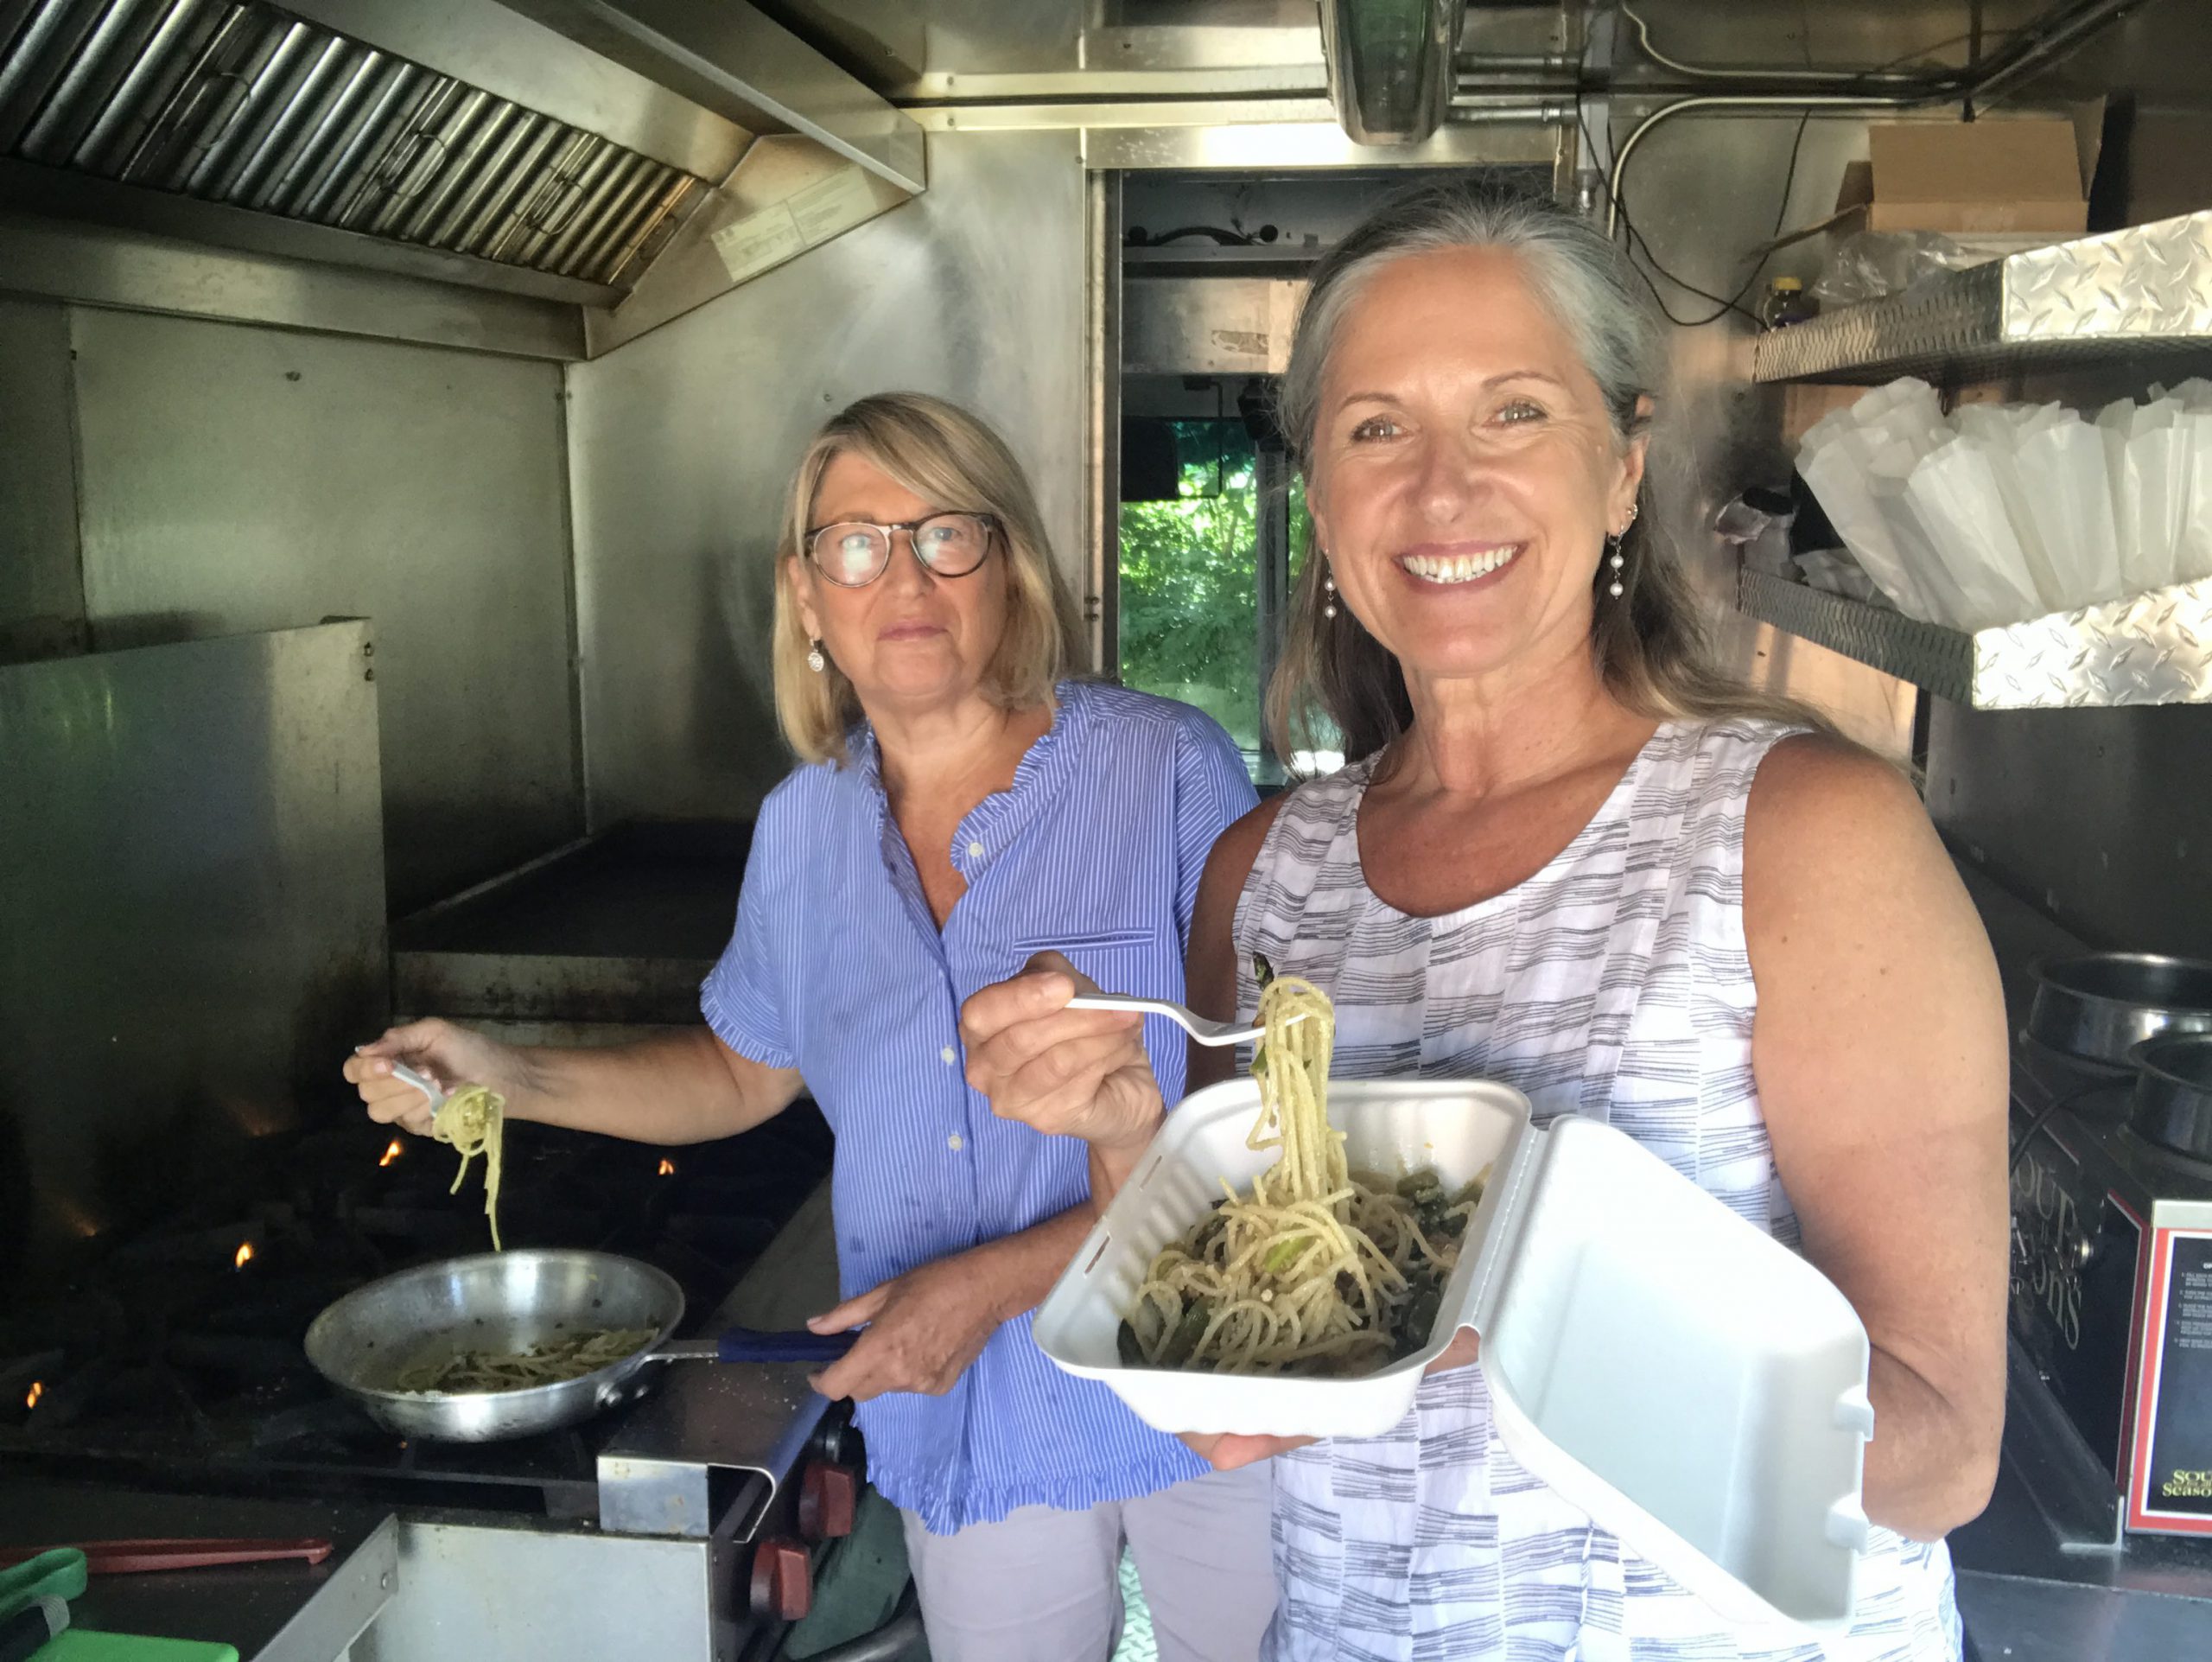 The Life Of A The Food Truck Owner with Debbie Ciardo